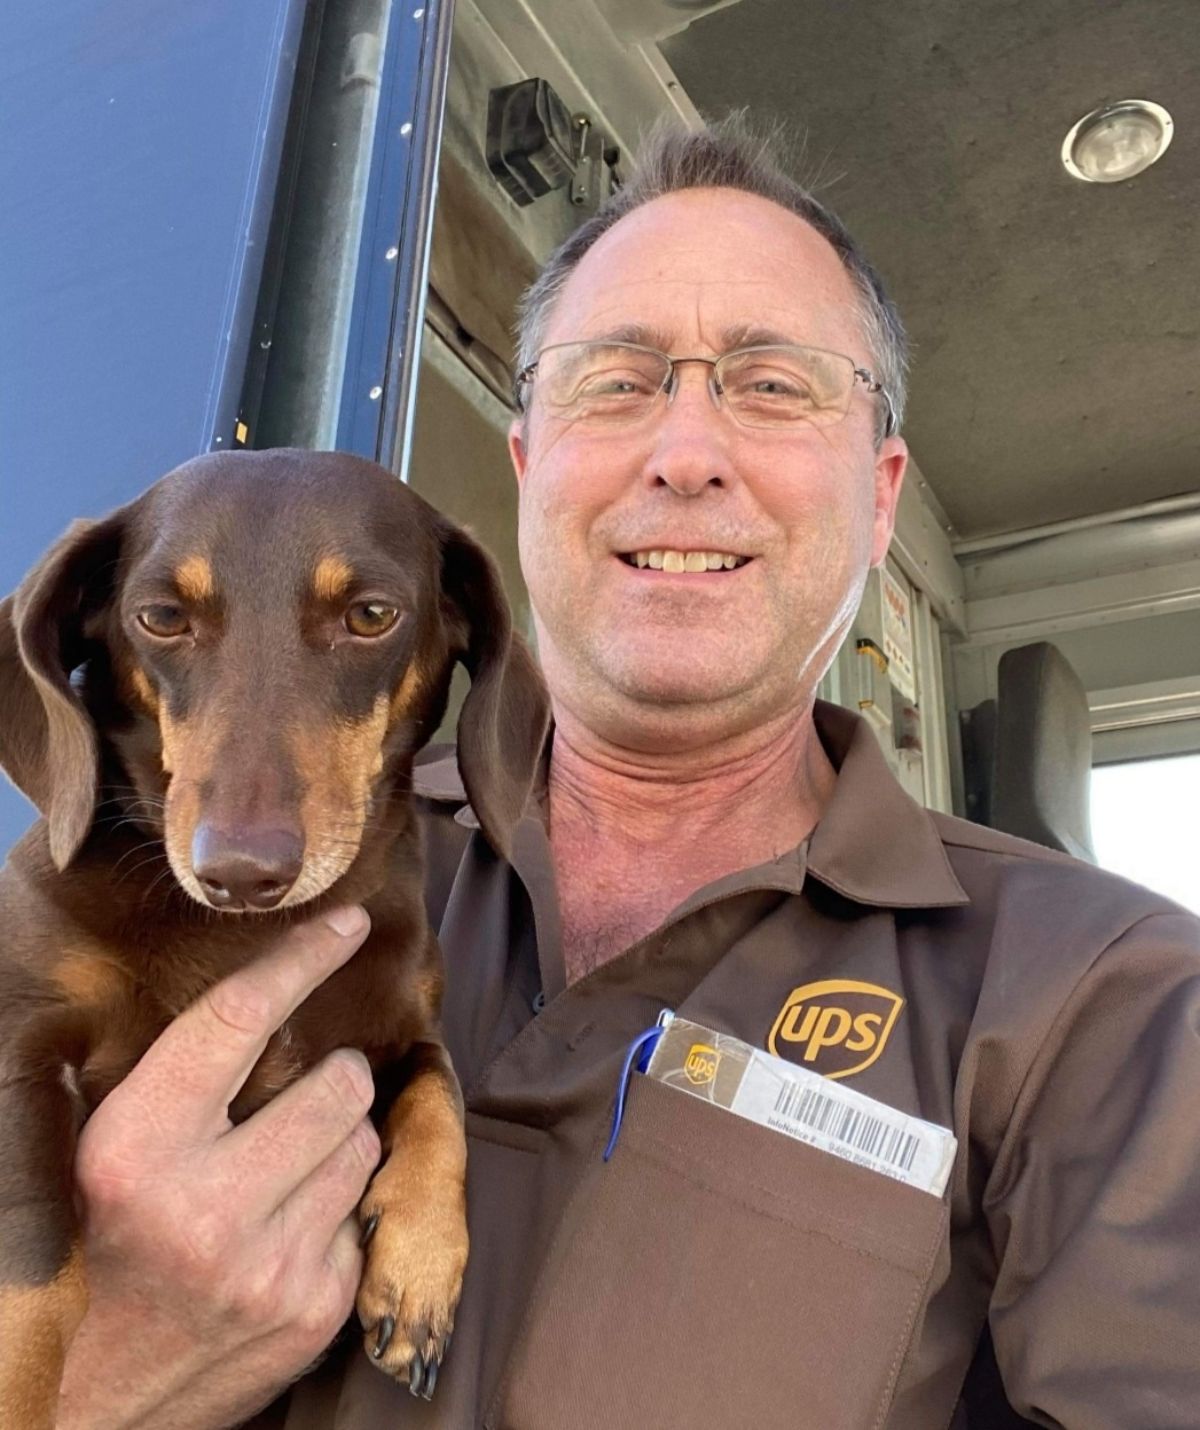 male ups driver holding a brown dachshund in his arms